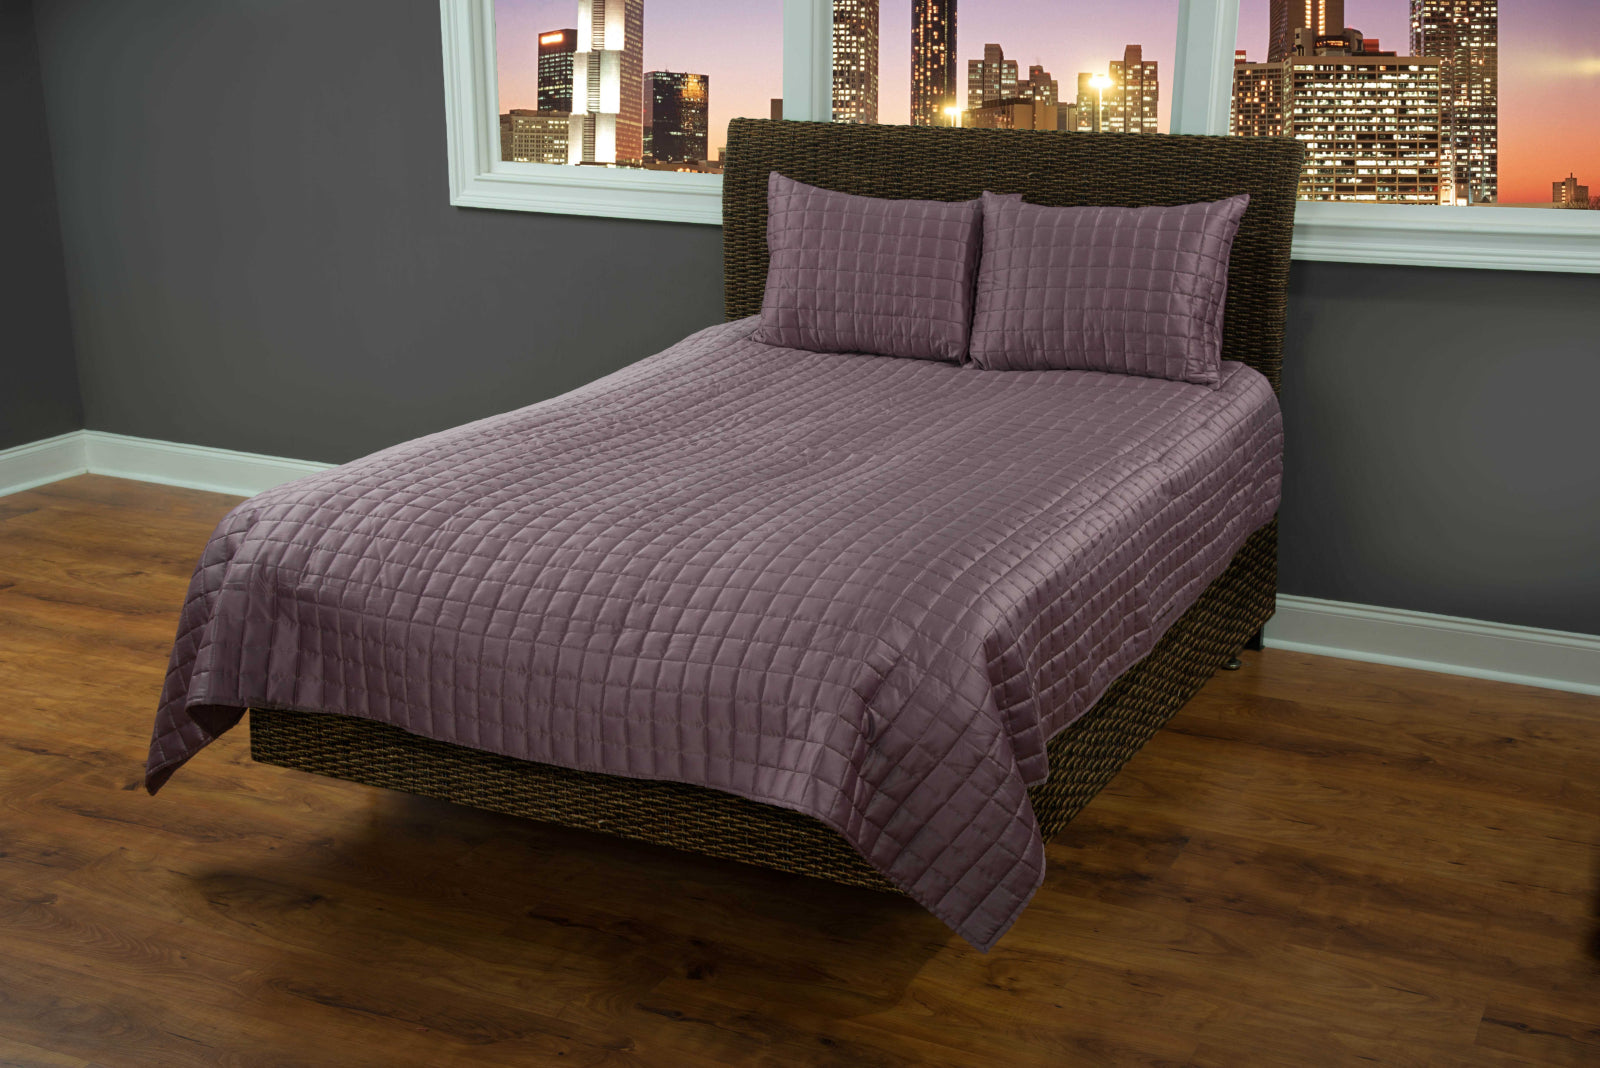 Rizzy BT1677 Satinology Orchid Purple Bedding main image